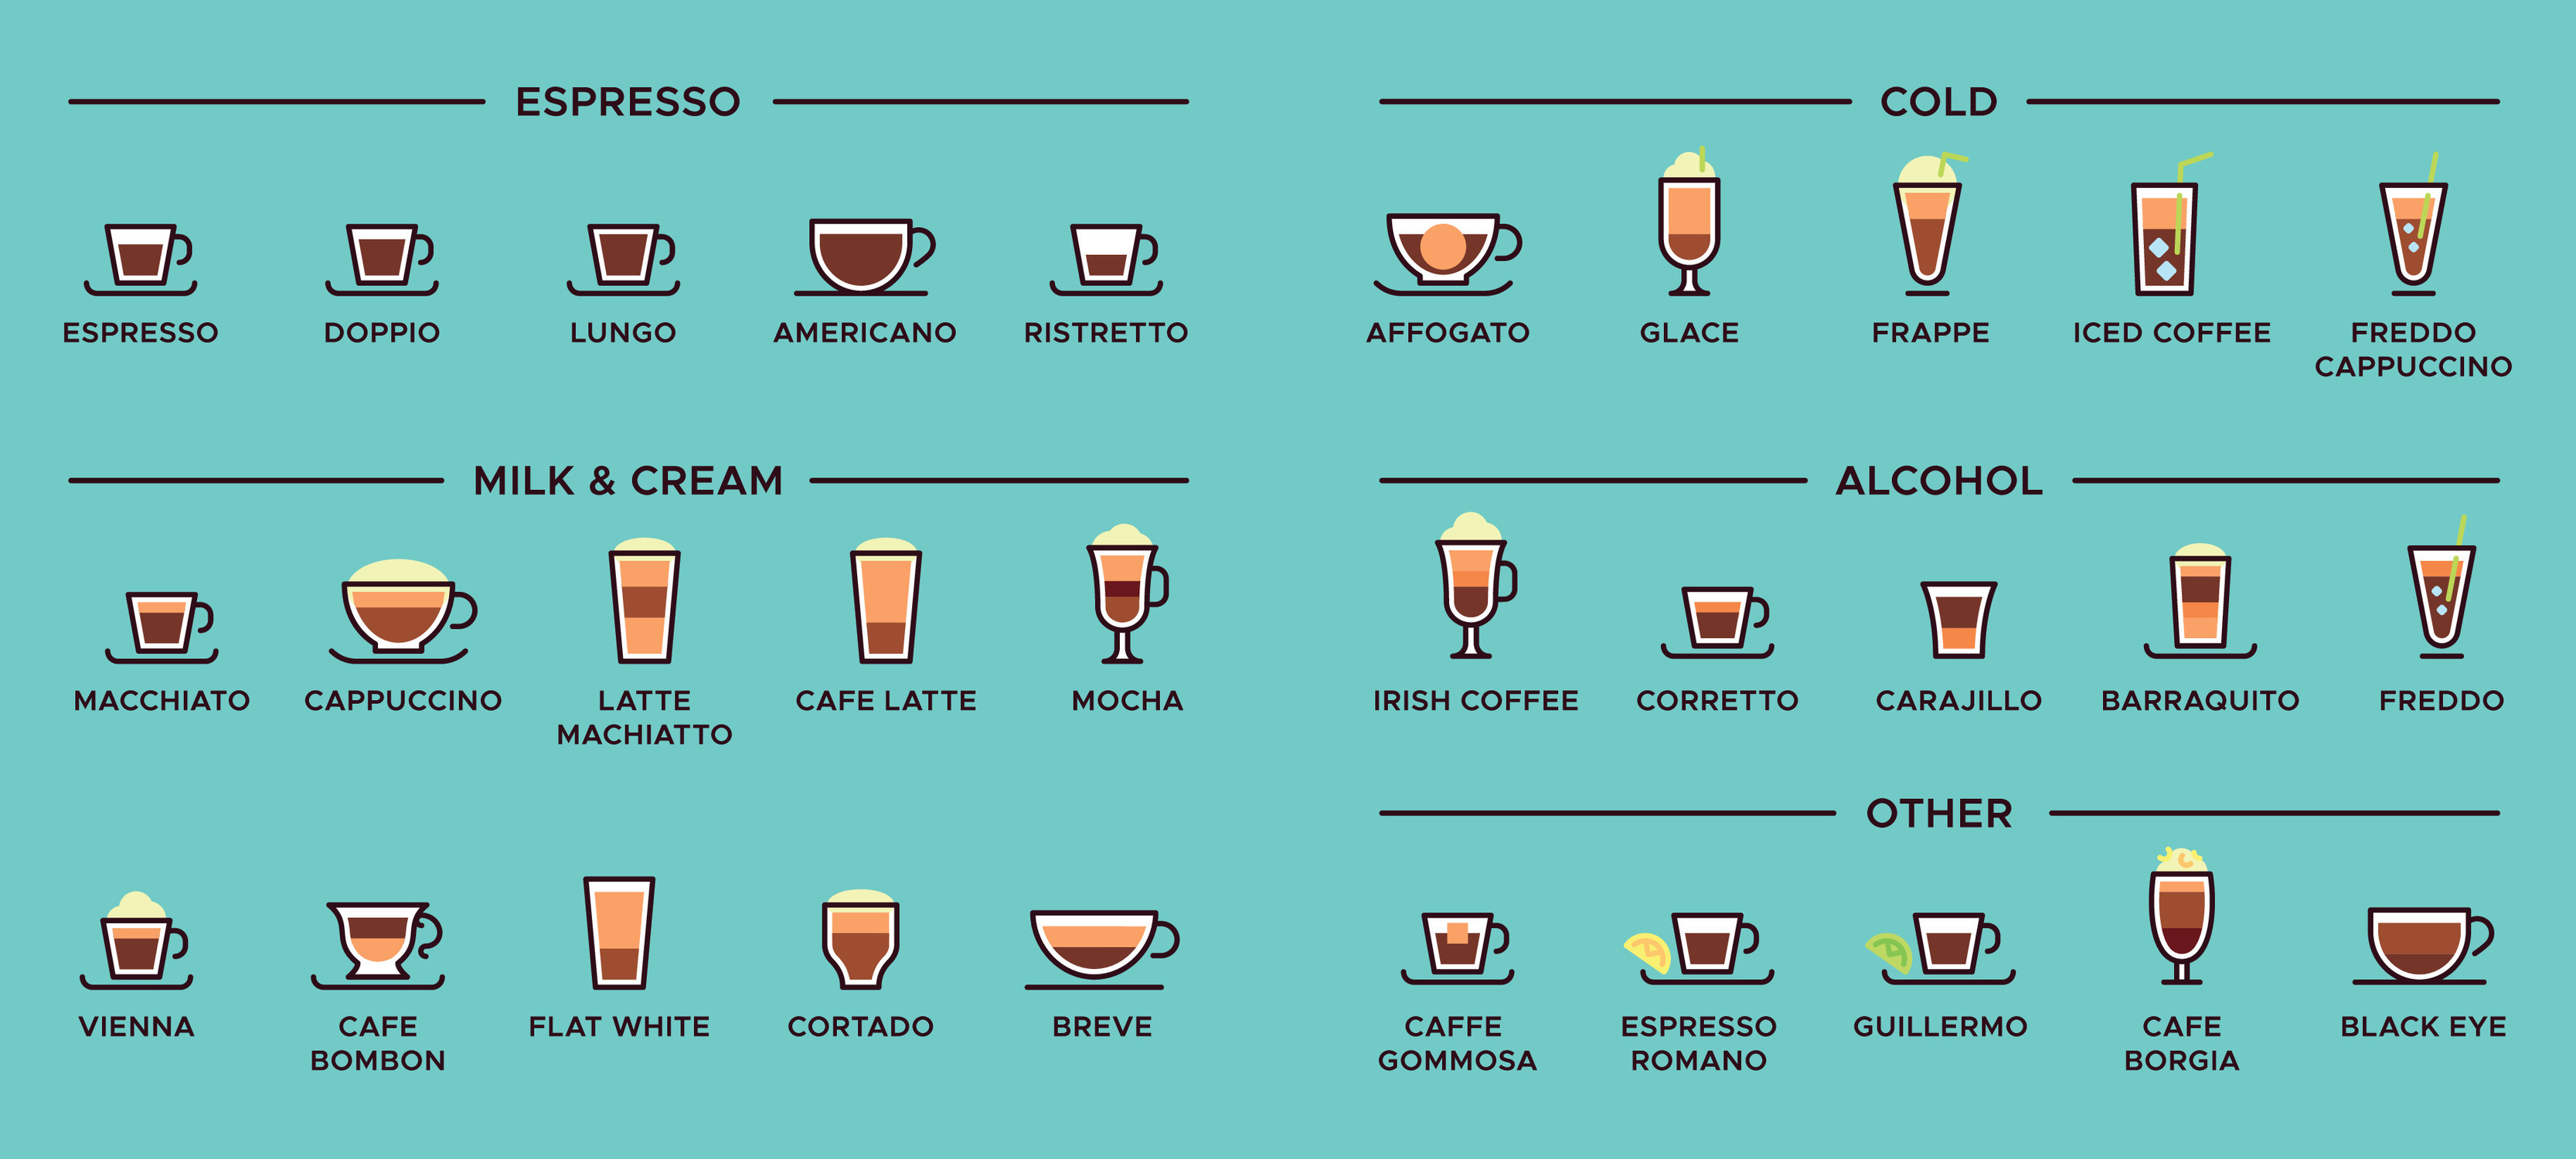 https://static.vecteezy.com/system/resources/previews/024/790/030/original/types-of-coffee-espresso-drinks-latte-cup-and-americano-infographic-scheme-illustration-vector.jpg